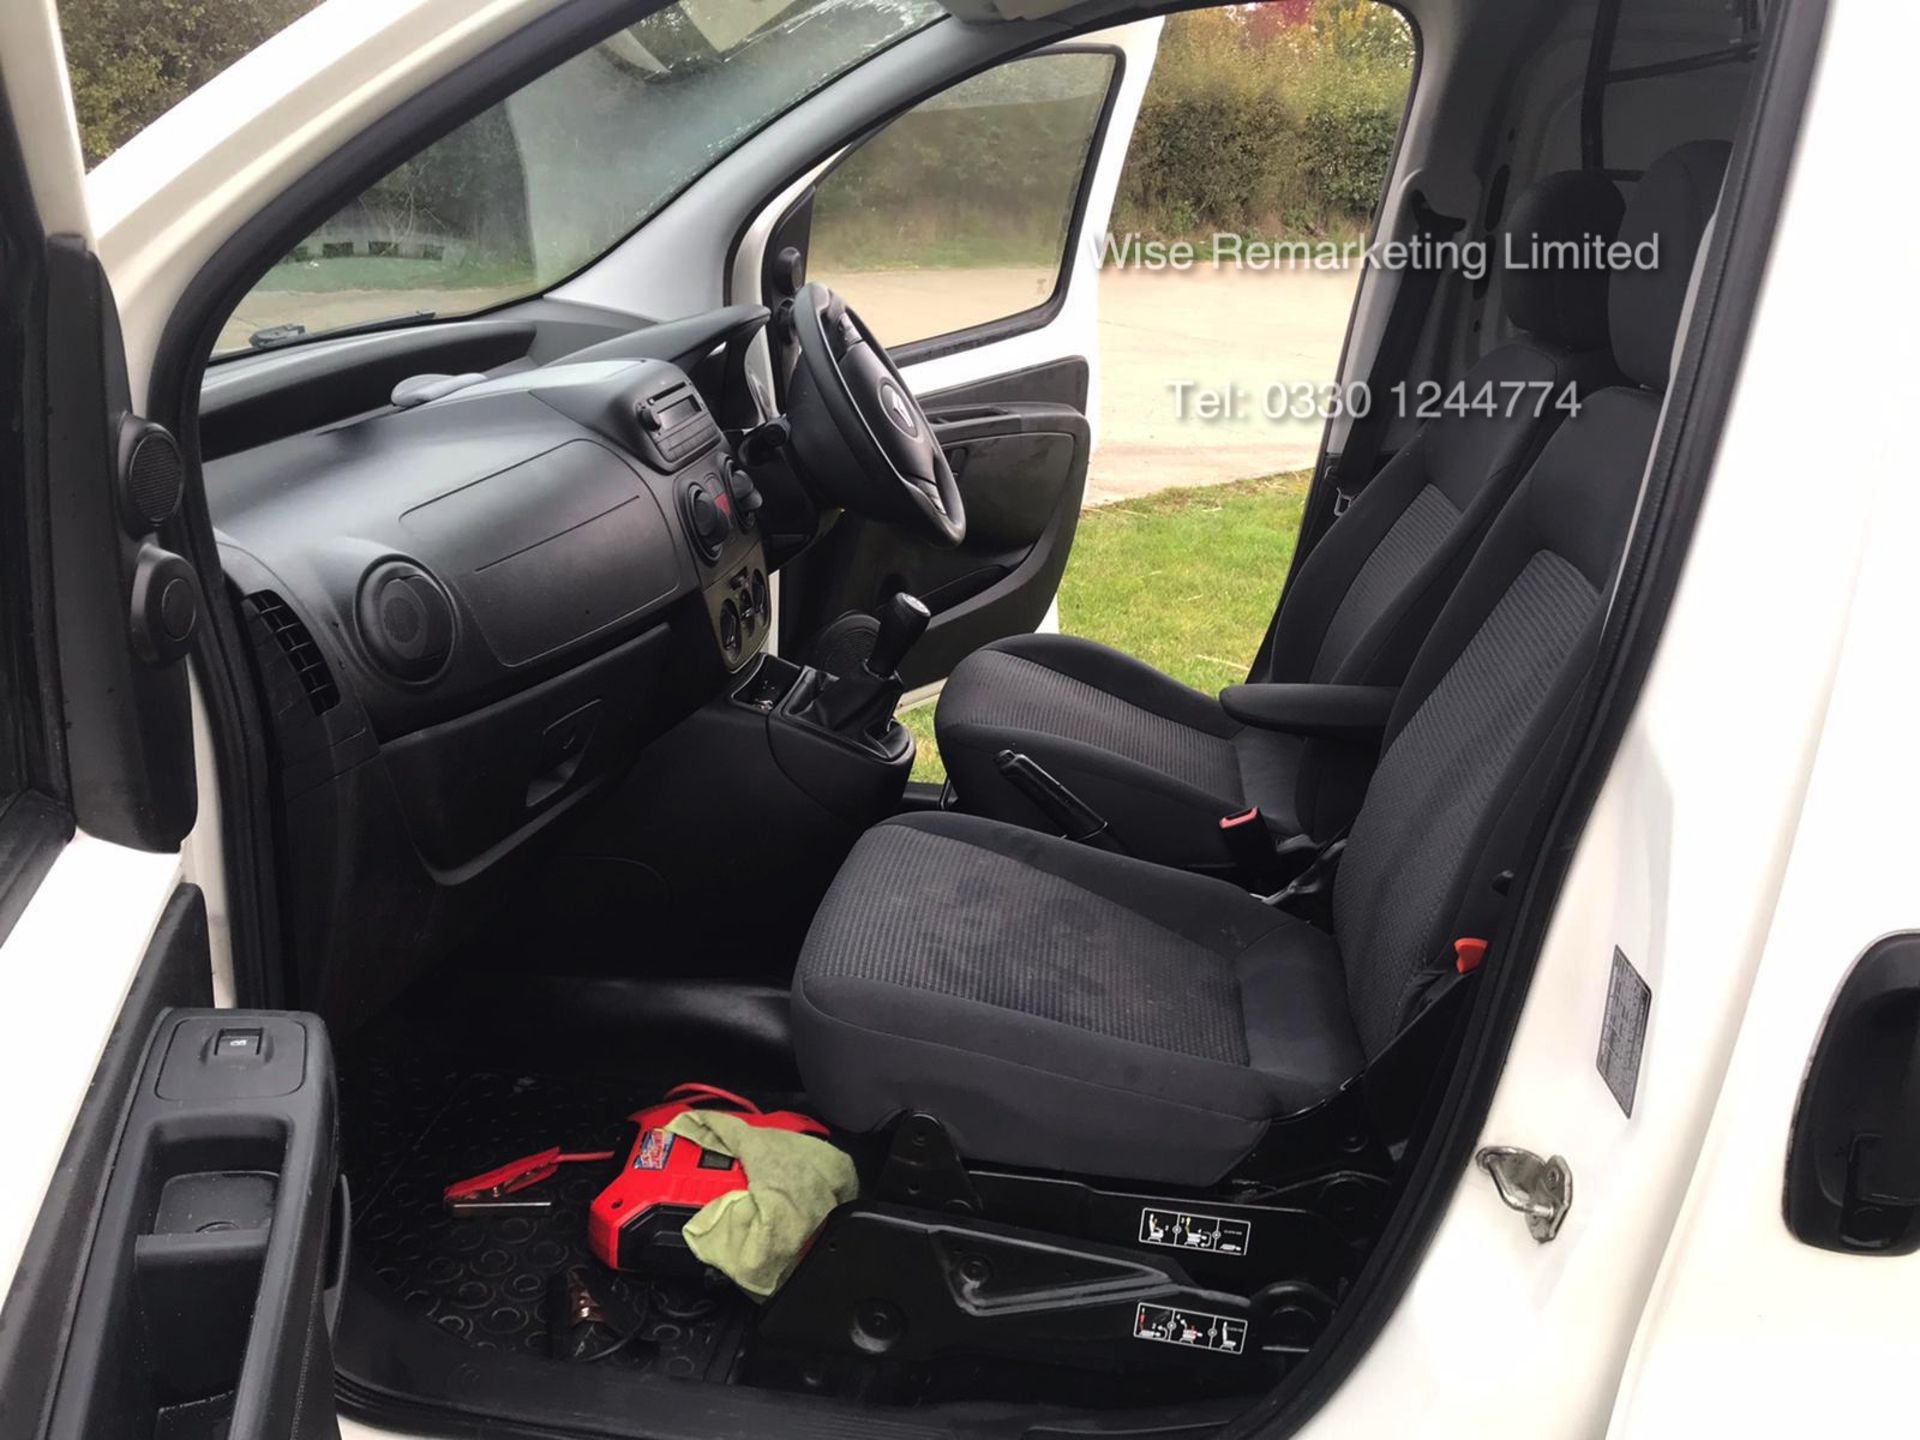 Citroen Nemo 660 Enterprise 1.3 DHi - 2014 14 Reg - 1 Owner From New - Air Con - Image 10 of 17